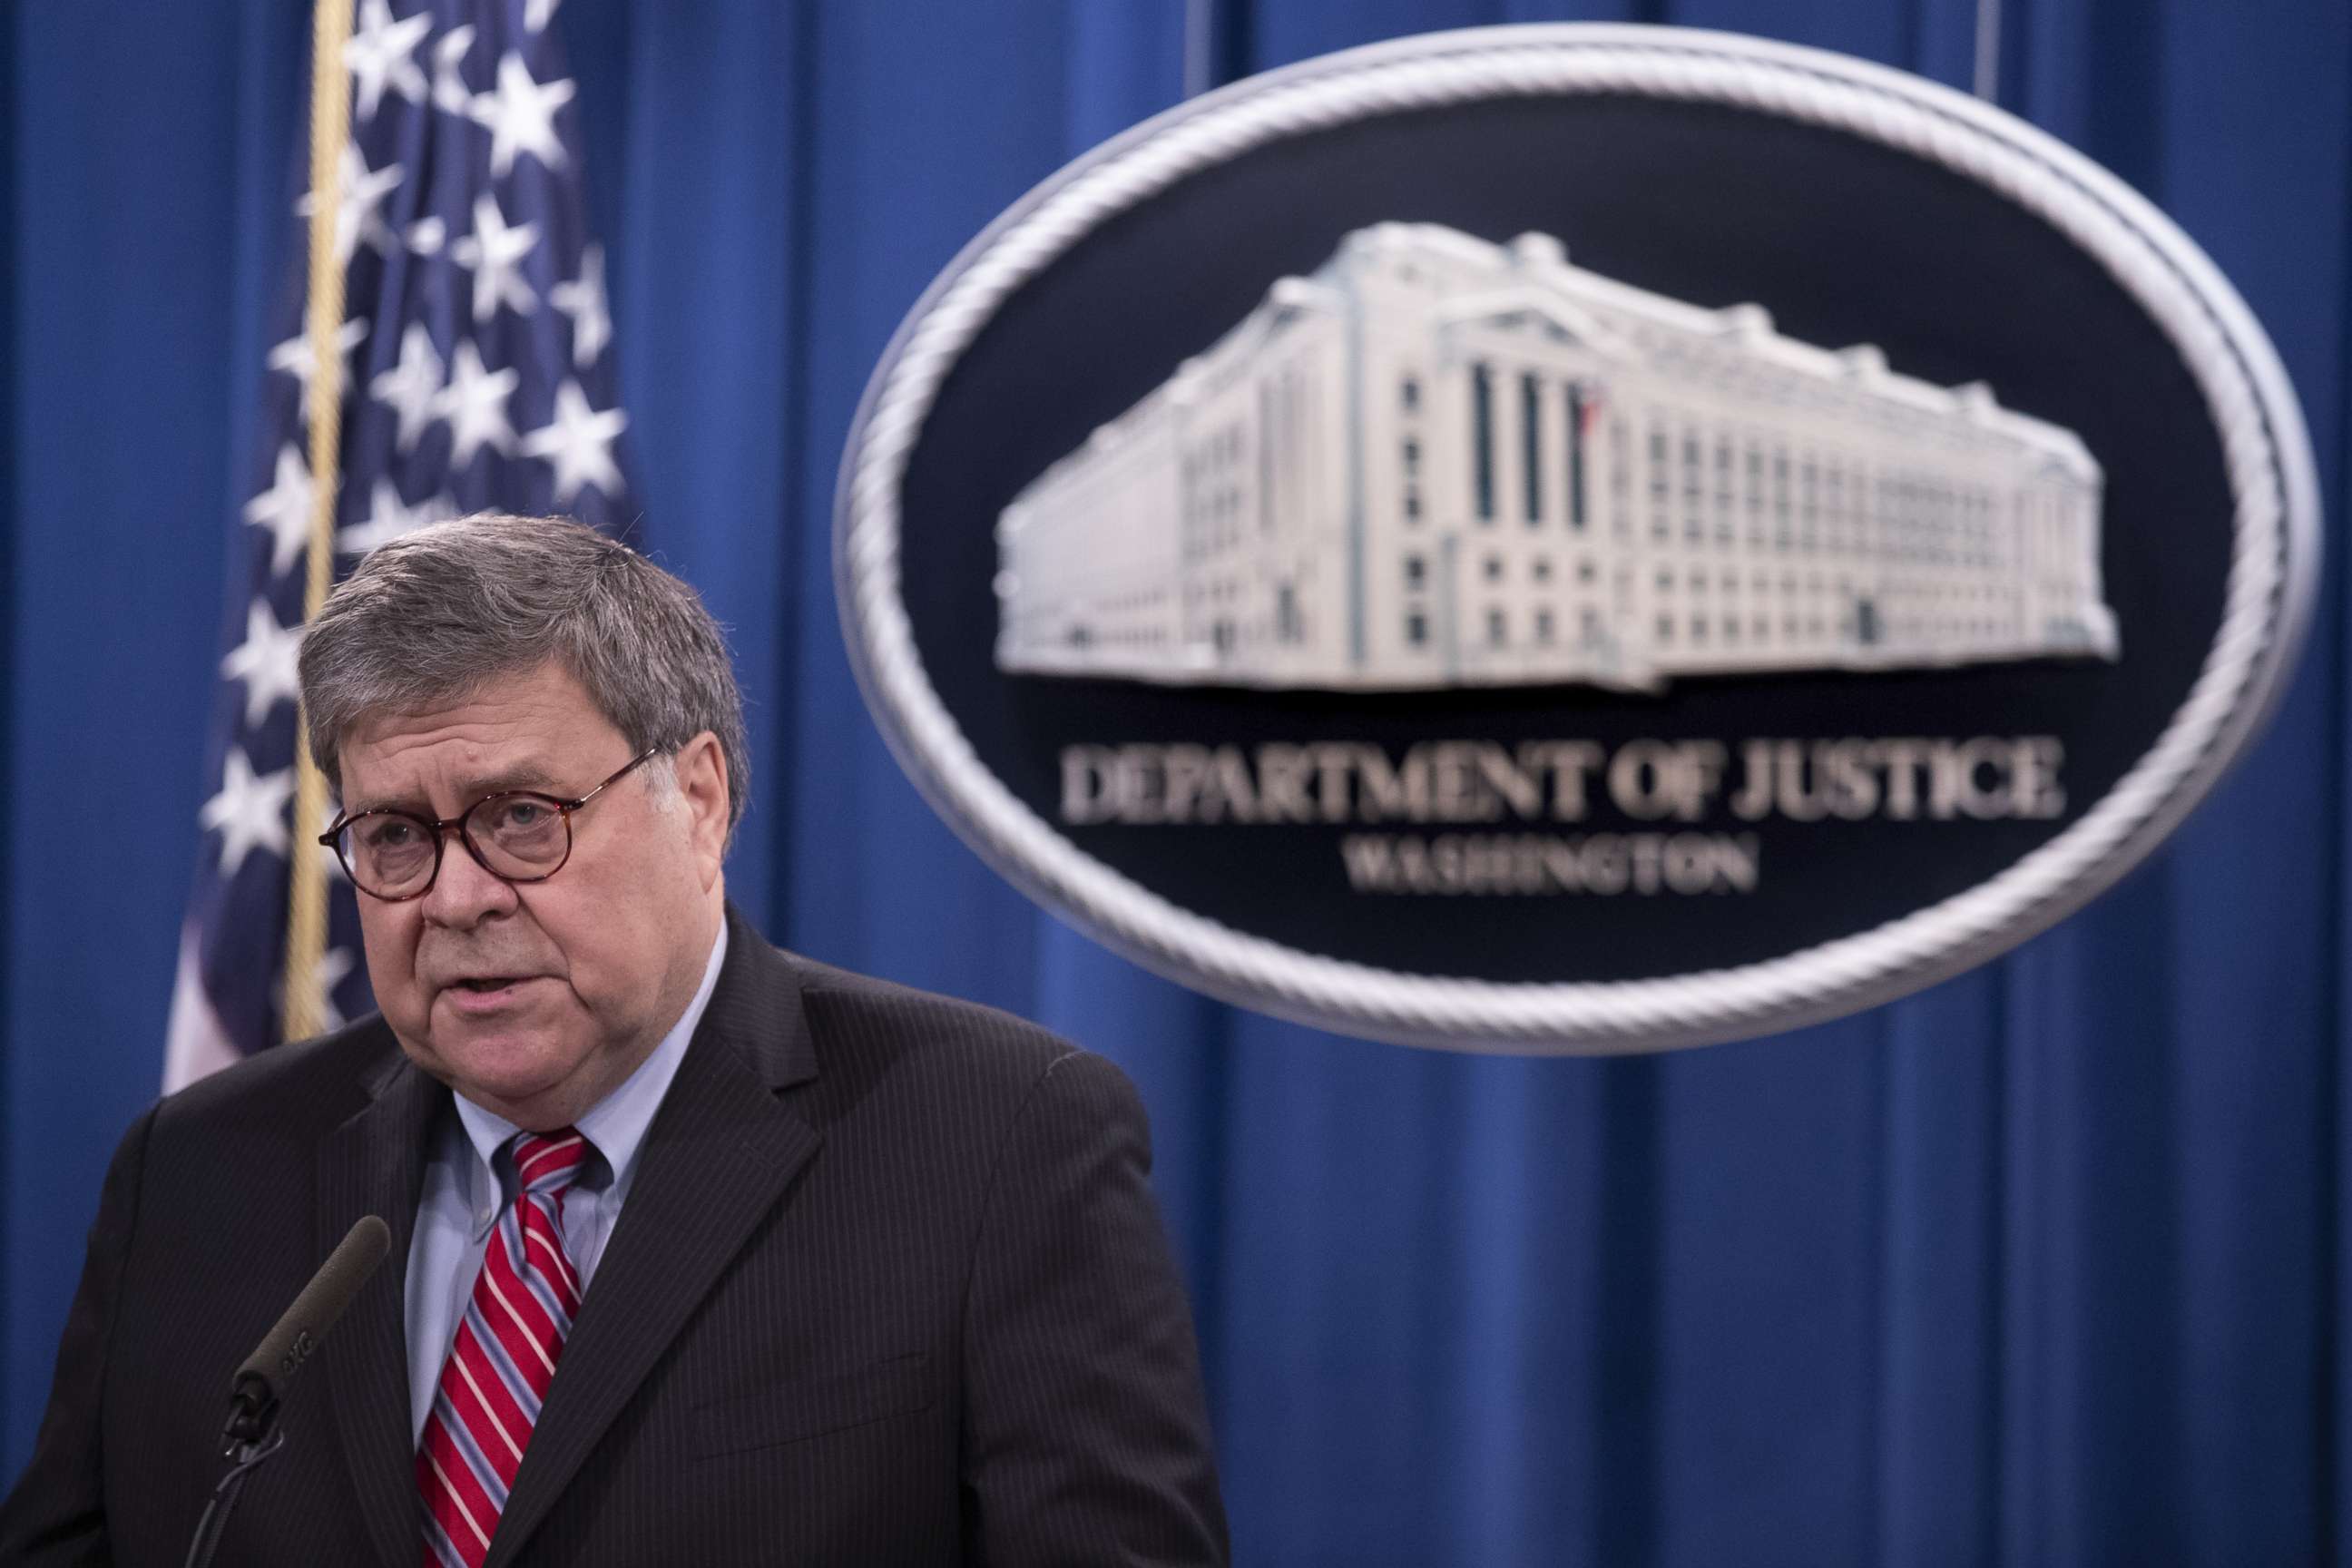 PHOTO: William Barr, U.S. attorney general, speaks during a news conference at the U.S. Department of Justice in Washington, Dec. 21, 2020.